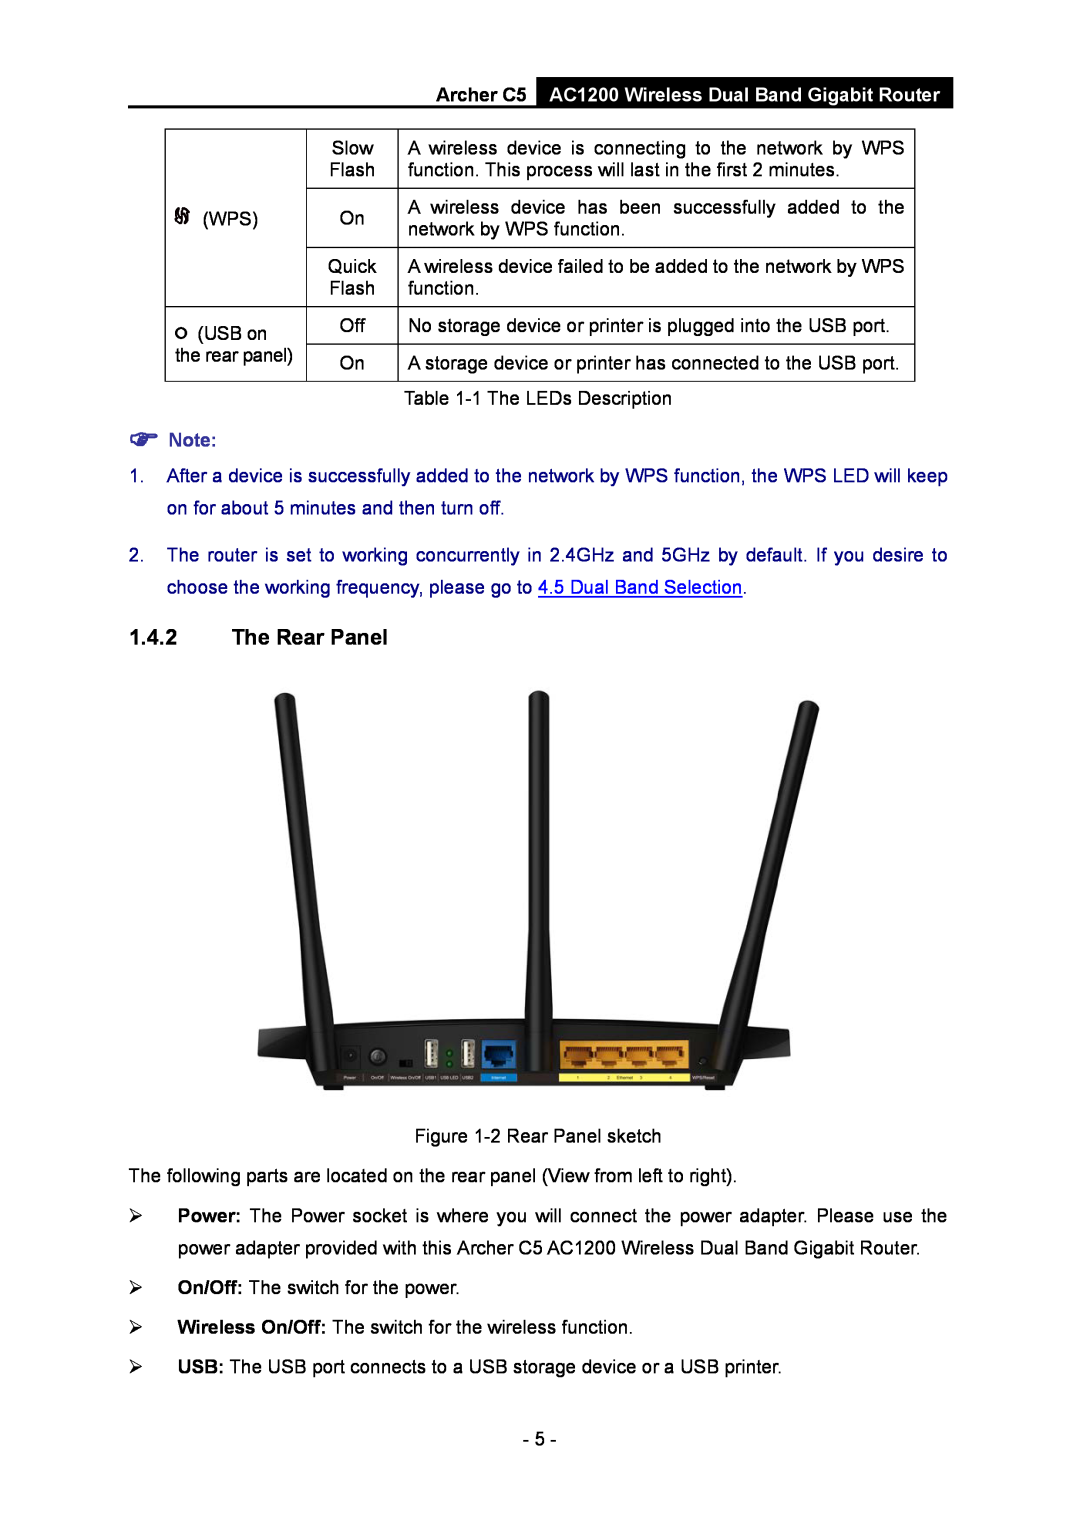 TP-Link manual The Rear Panel, Archer C5, AC1200 Wireless Dual Band Gigabit Router,  Note 